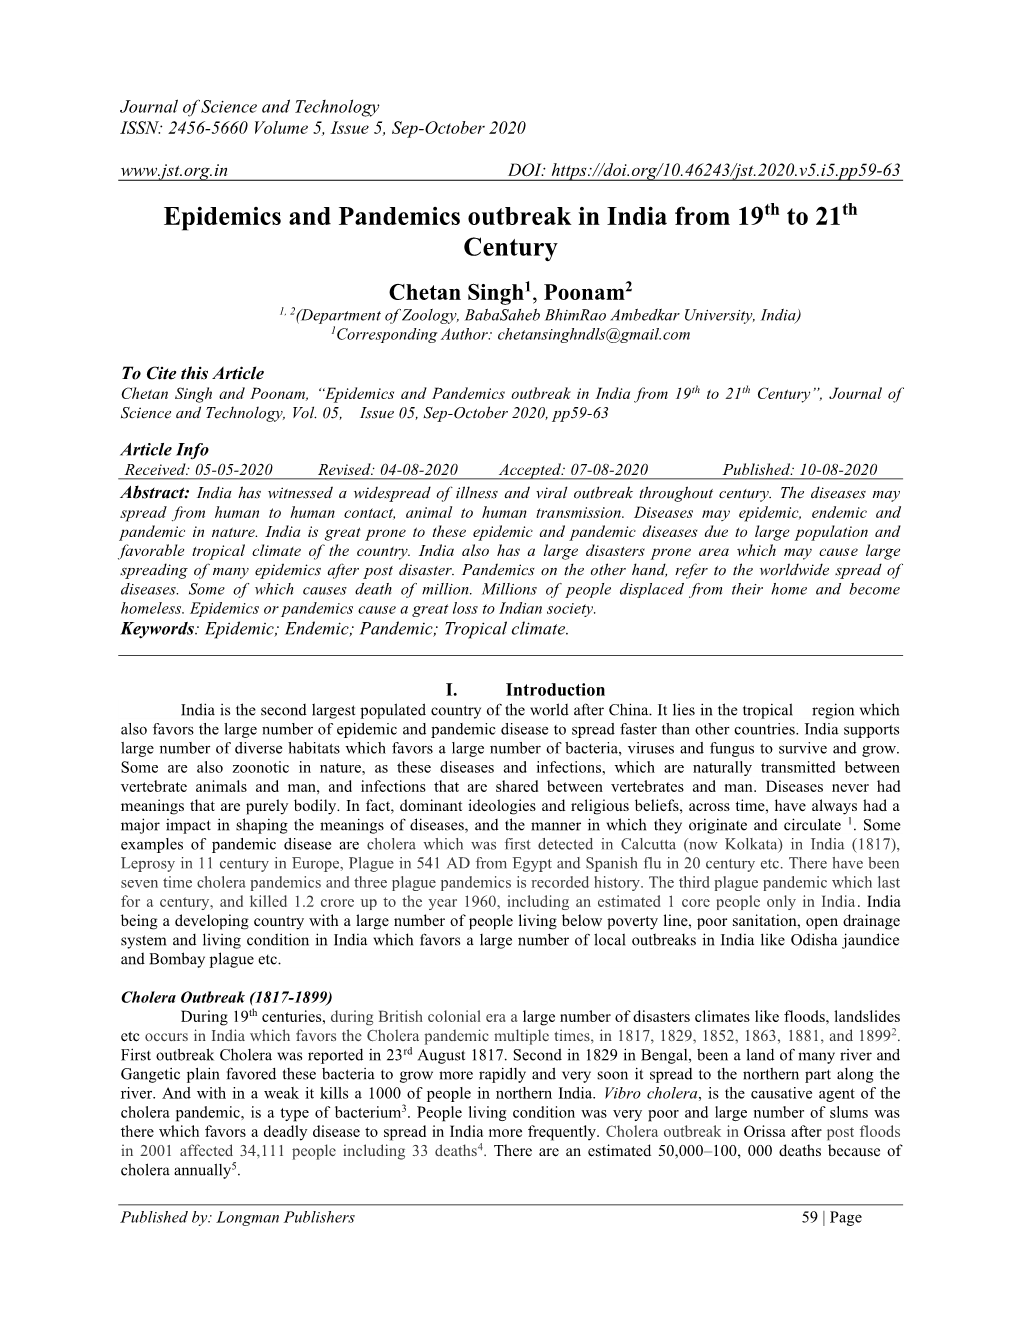 Epidemics and Pandemics Outbreak in India from 19Th to 21Th Century